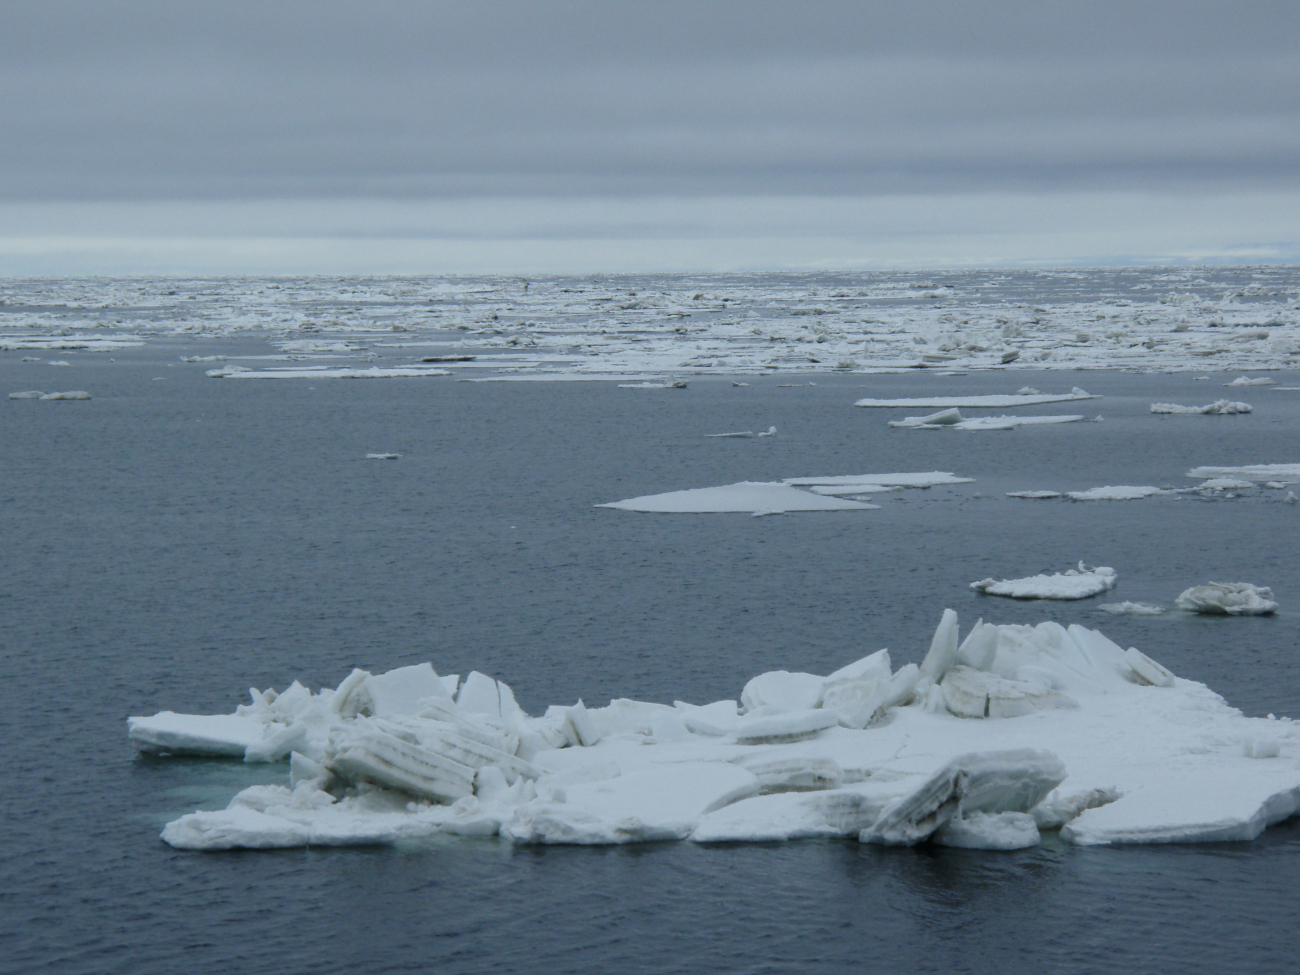 Large floes that show evidence of having been jostled and overrun by nearbyfloes in rough seas